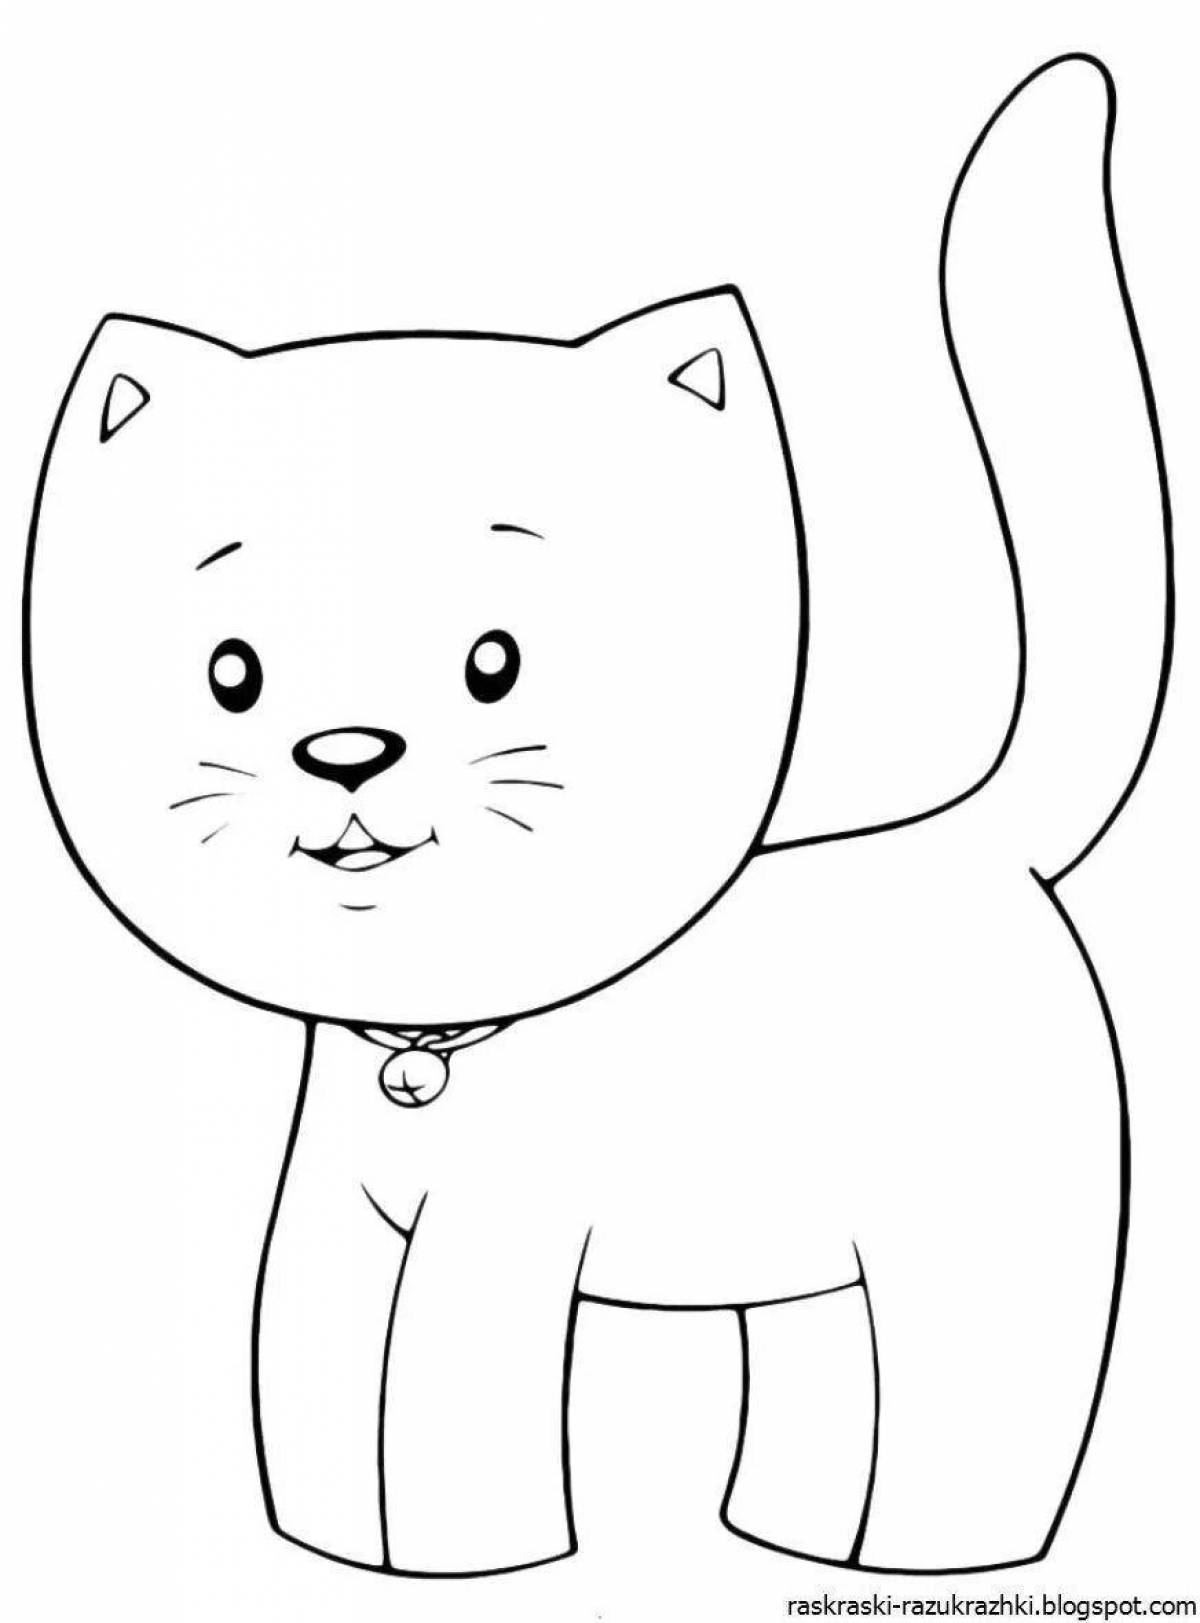 Creative kitten coloring book for 2-3 year olds